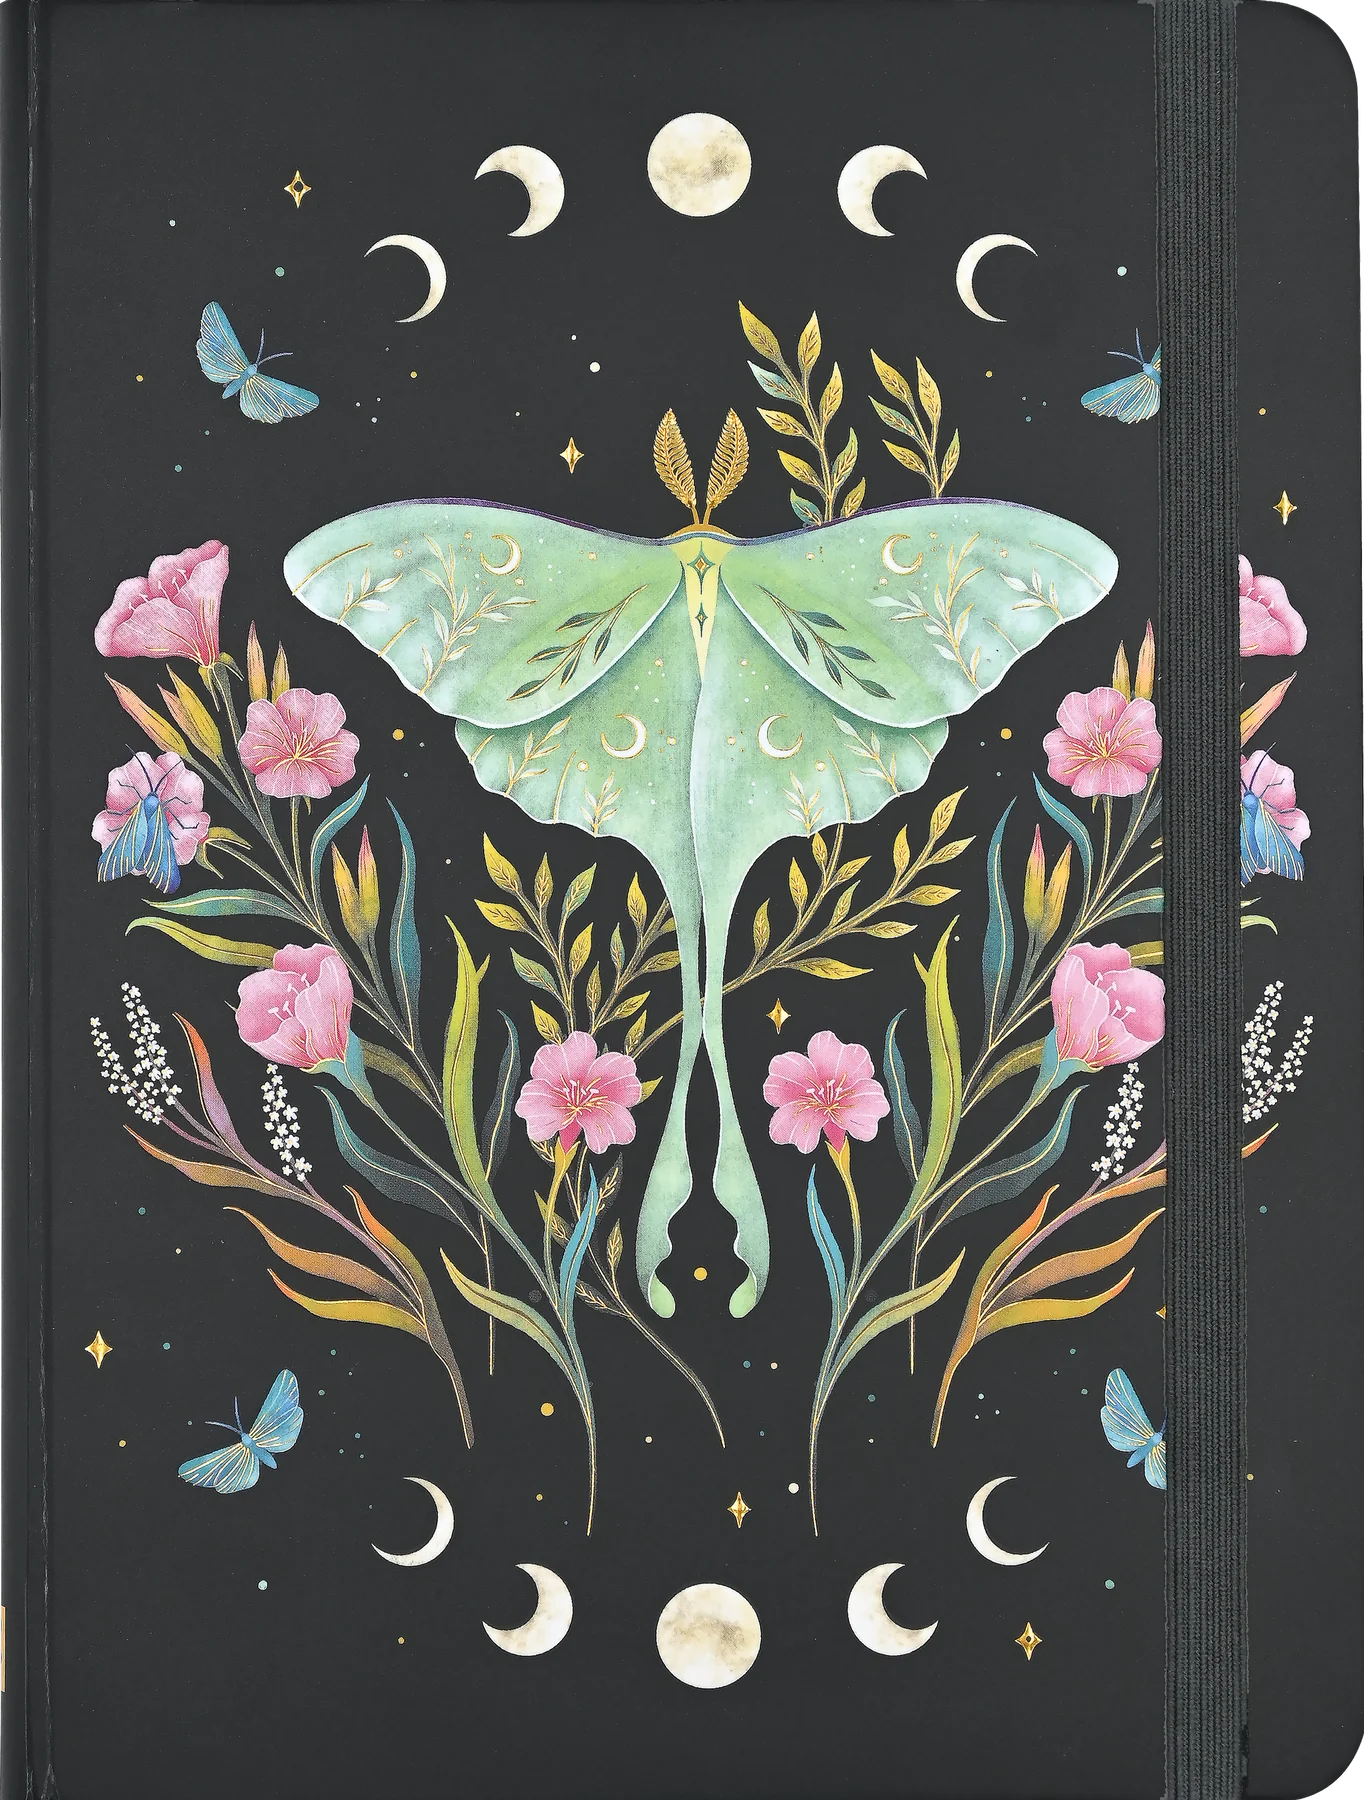 Nocturnal : Luna Moon Moth Original Alcohol Markers Art Print by